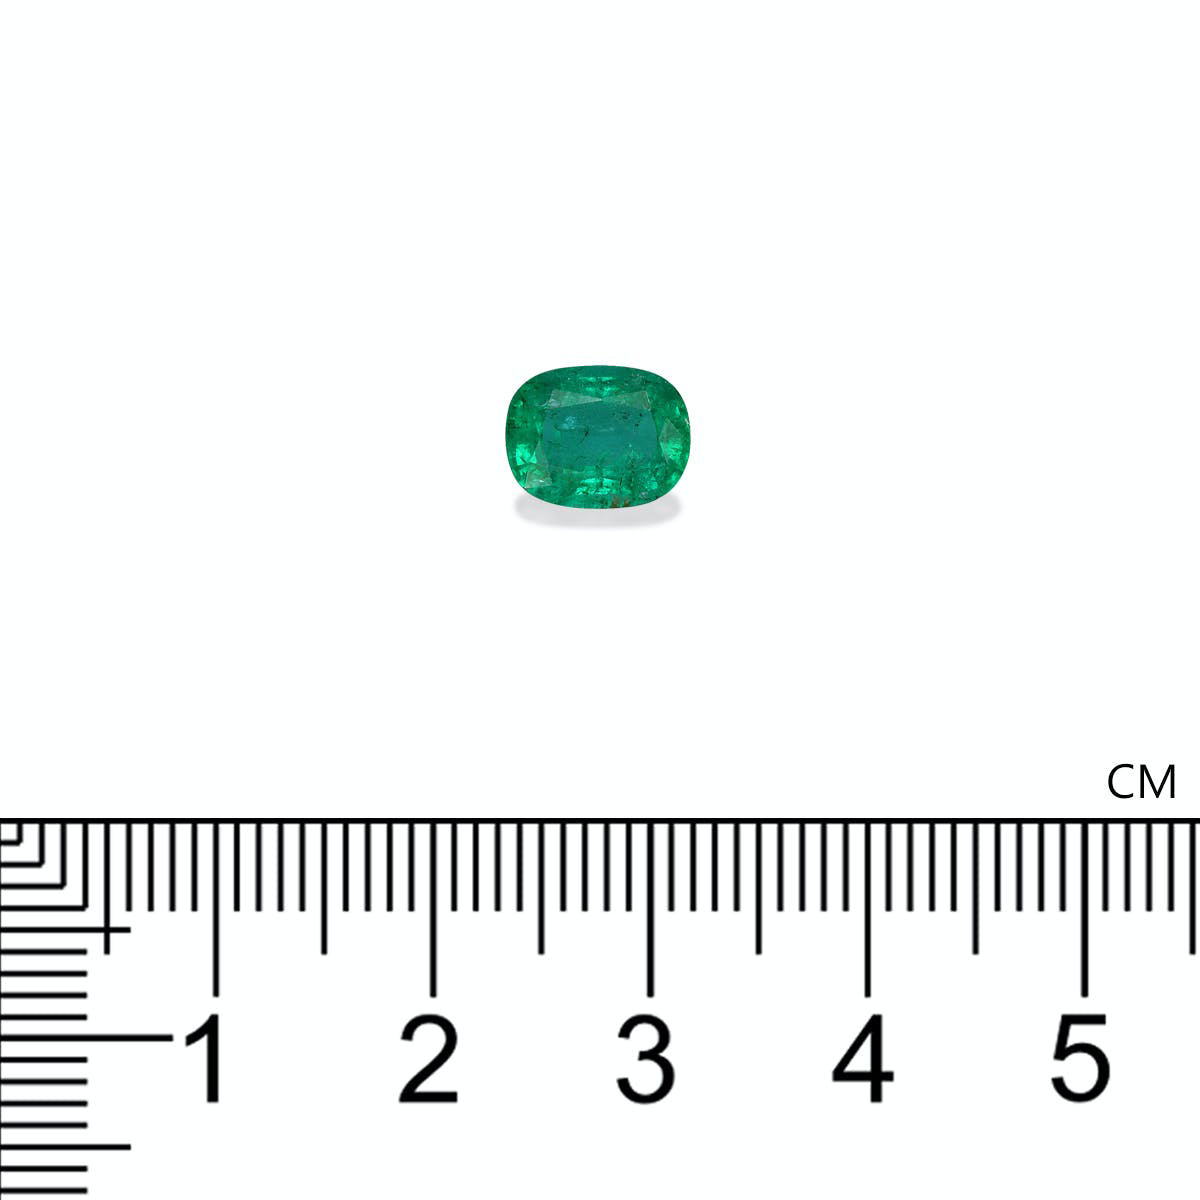 Picture of Green Zambian Emerald 1.33ct - 8x6mm (PG0239)